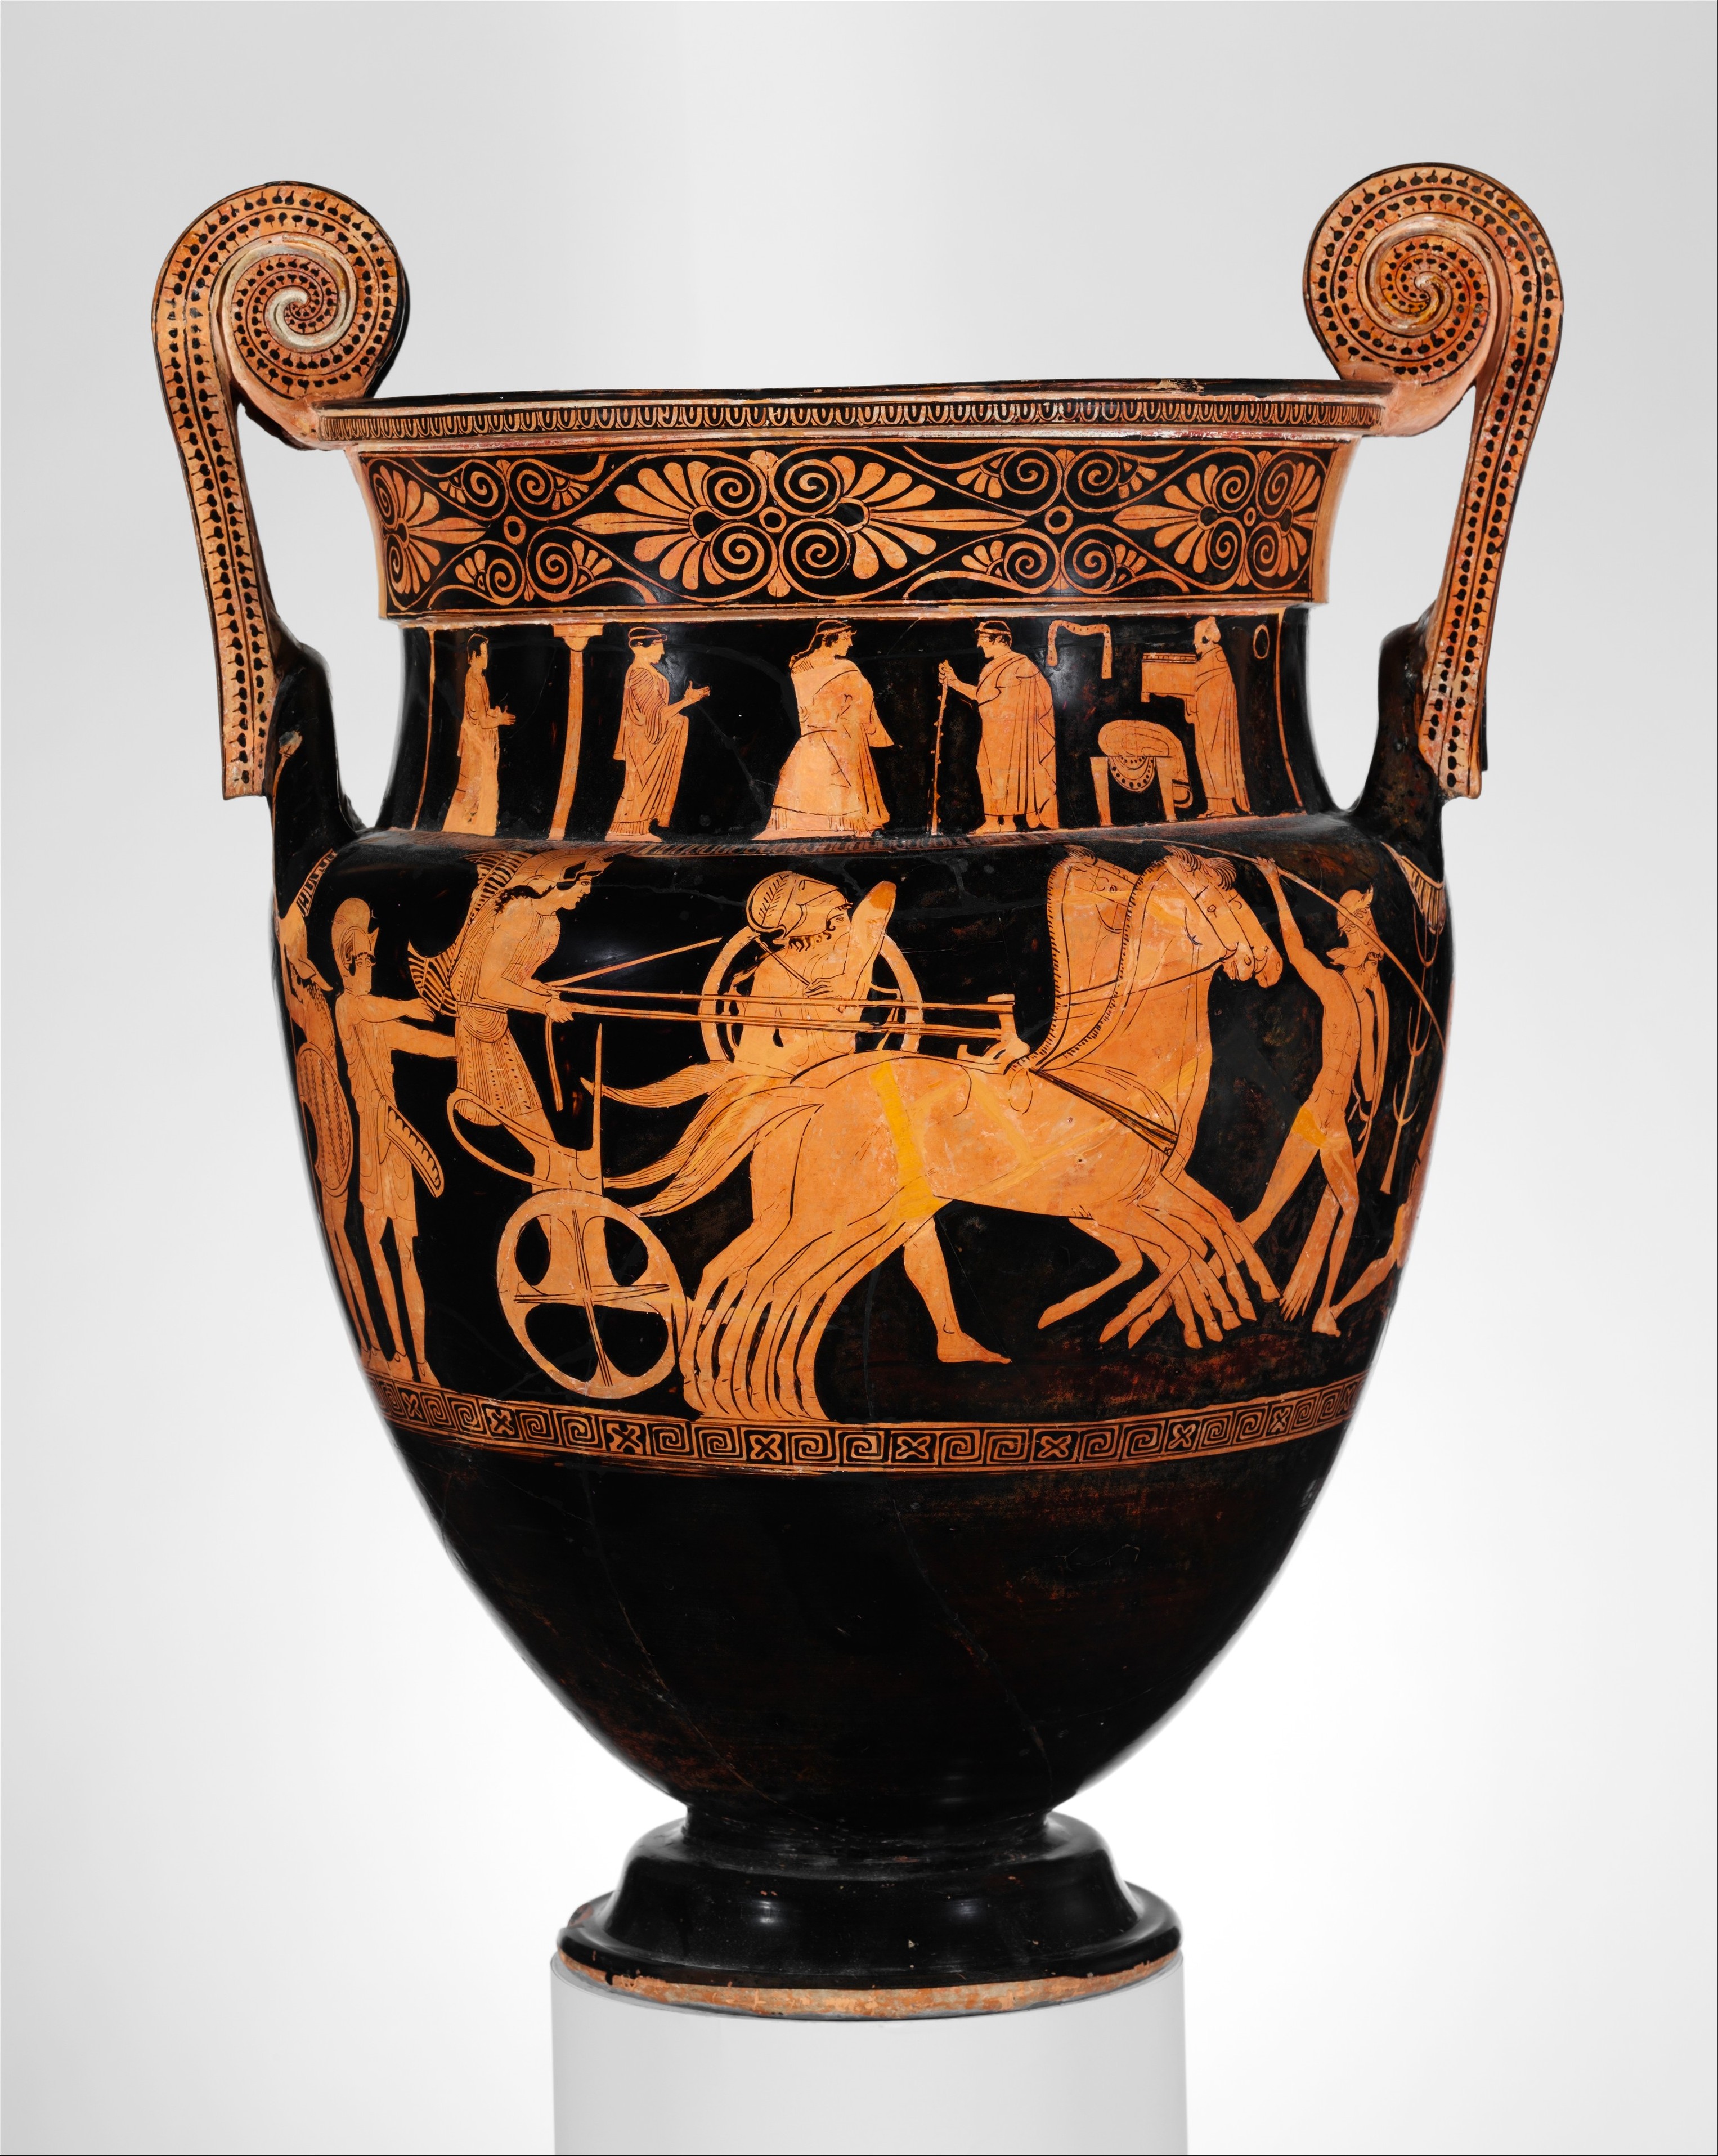 An Amazon, in a cap and tunic, rides a chariot pulled by two horses. On either side, three Greek warriors fight two more Amazons.